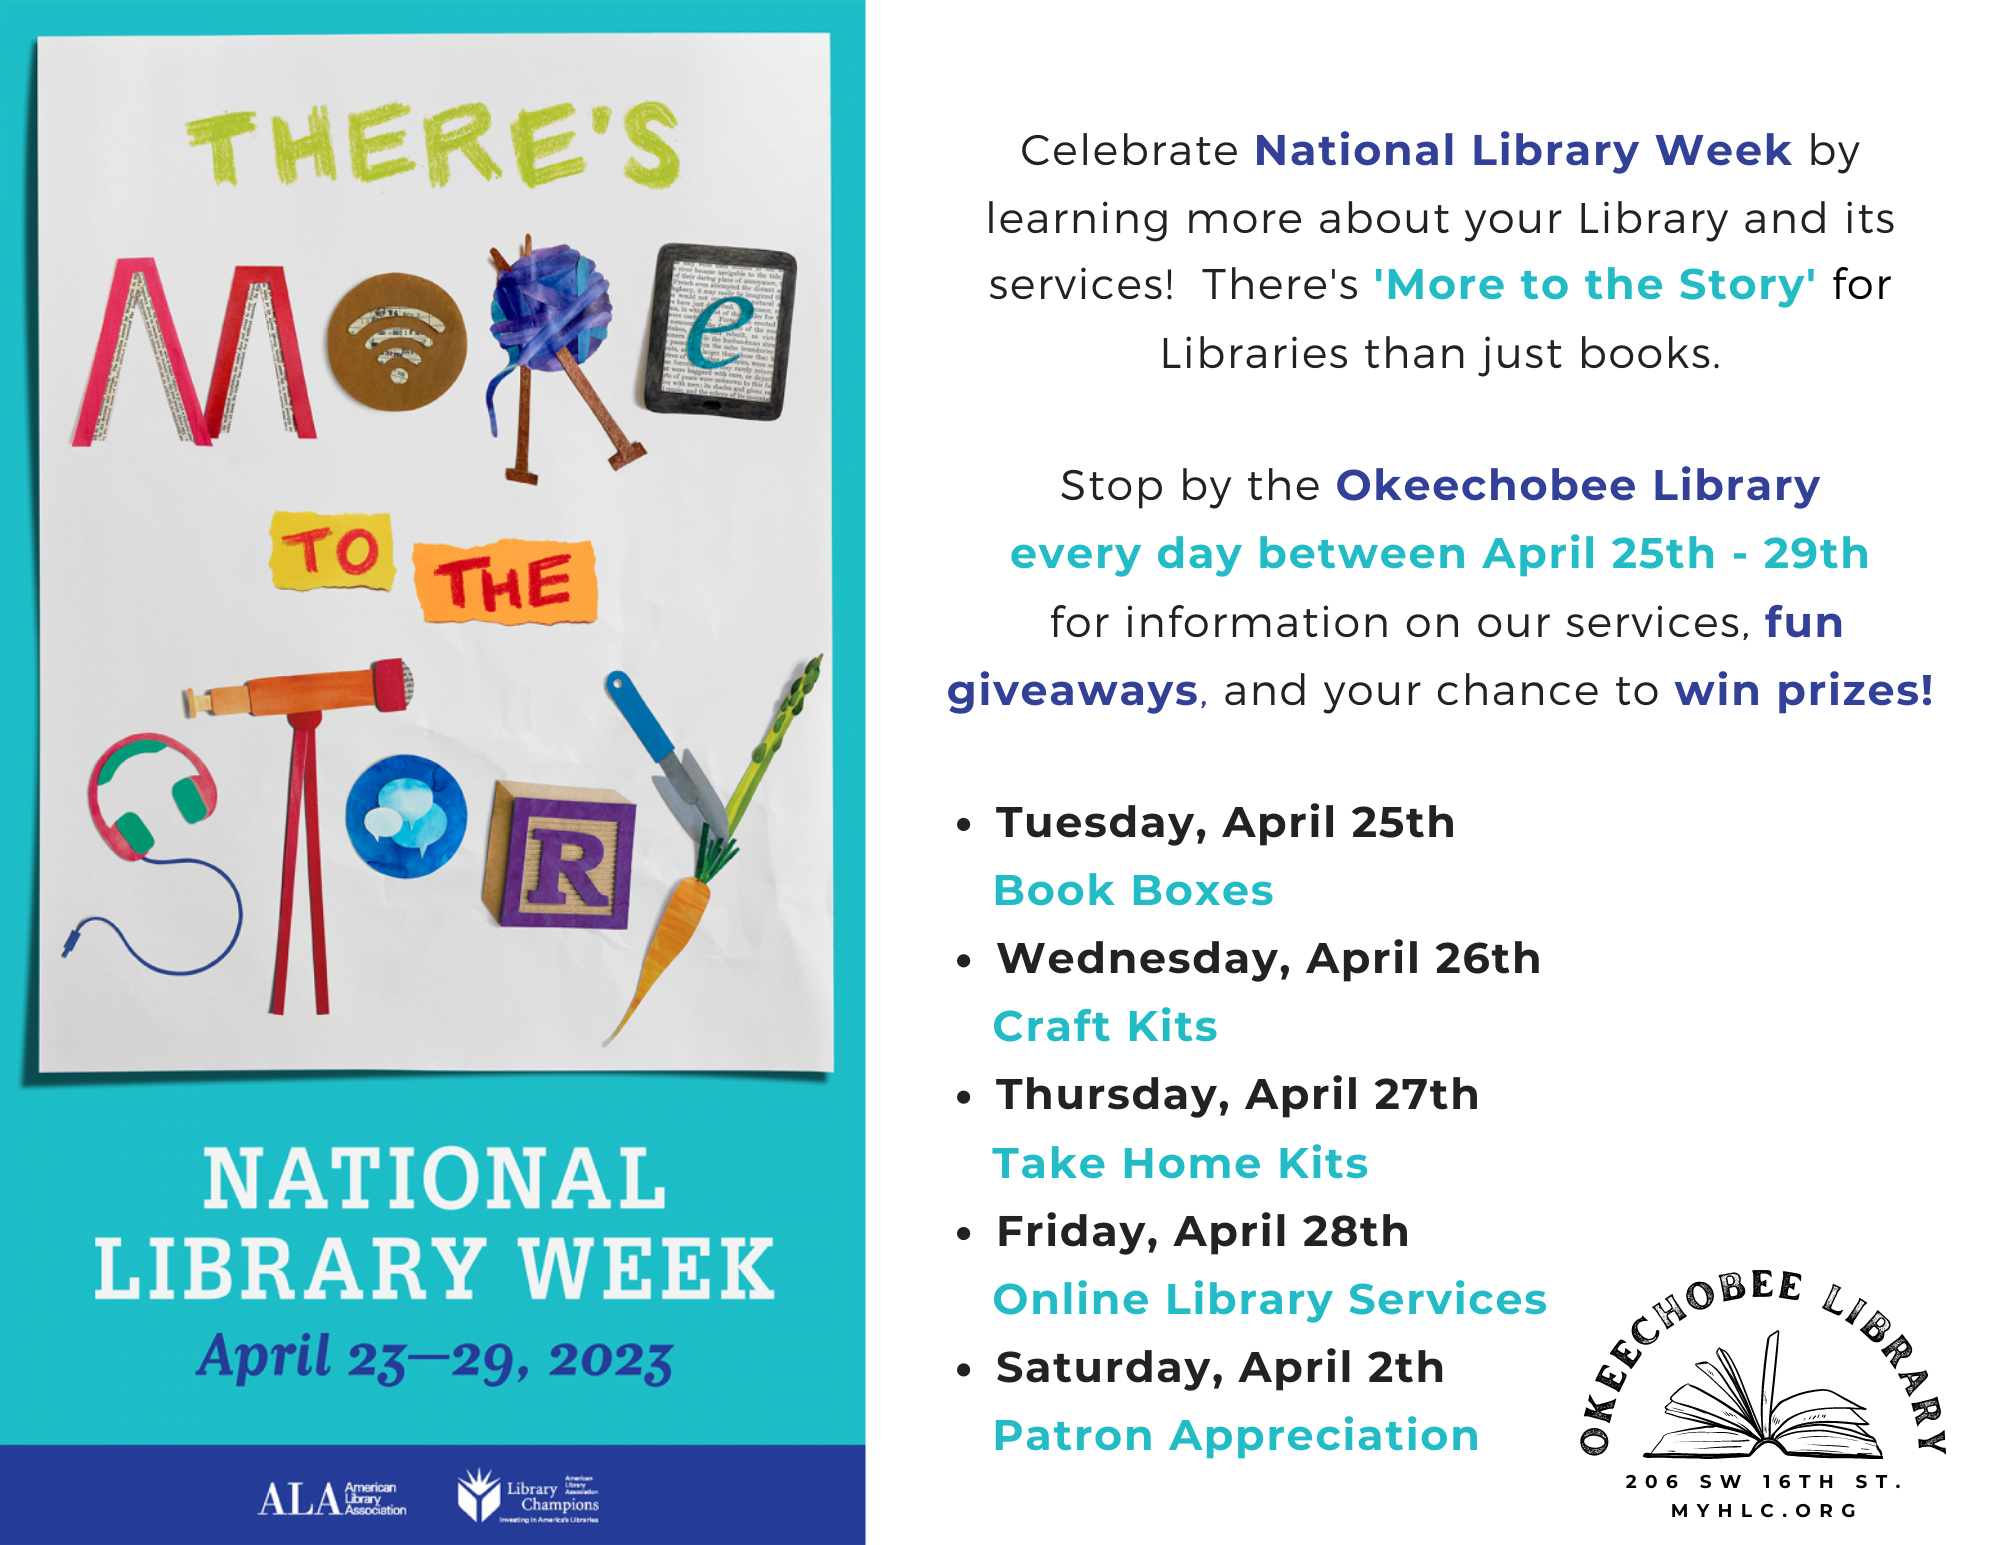 There's 'More to the Story' than just books for the Okeechobee Library. Stop by to learn about a different a Library service every day between April 25th - 29th and receive fun giveaways and more!